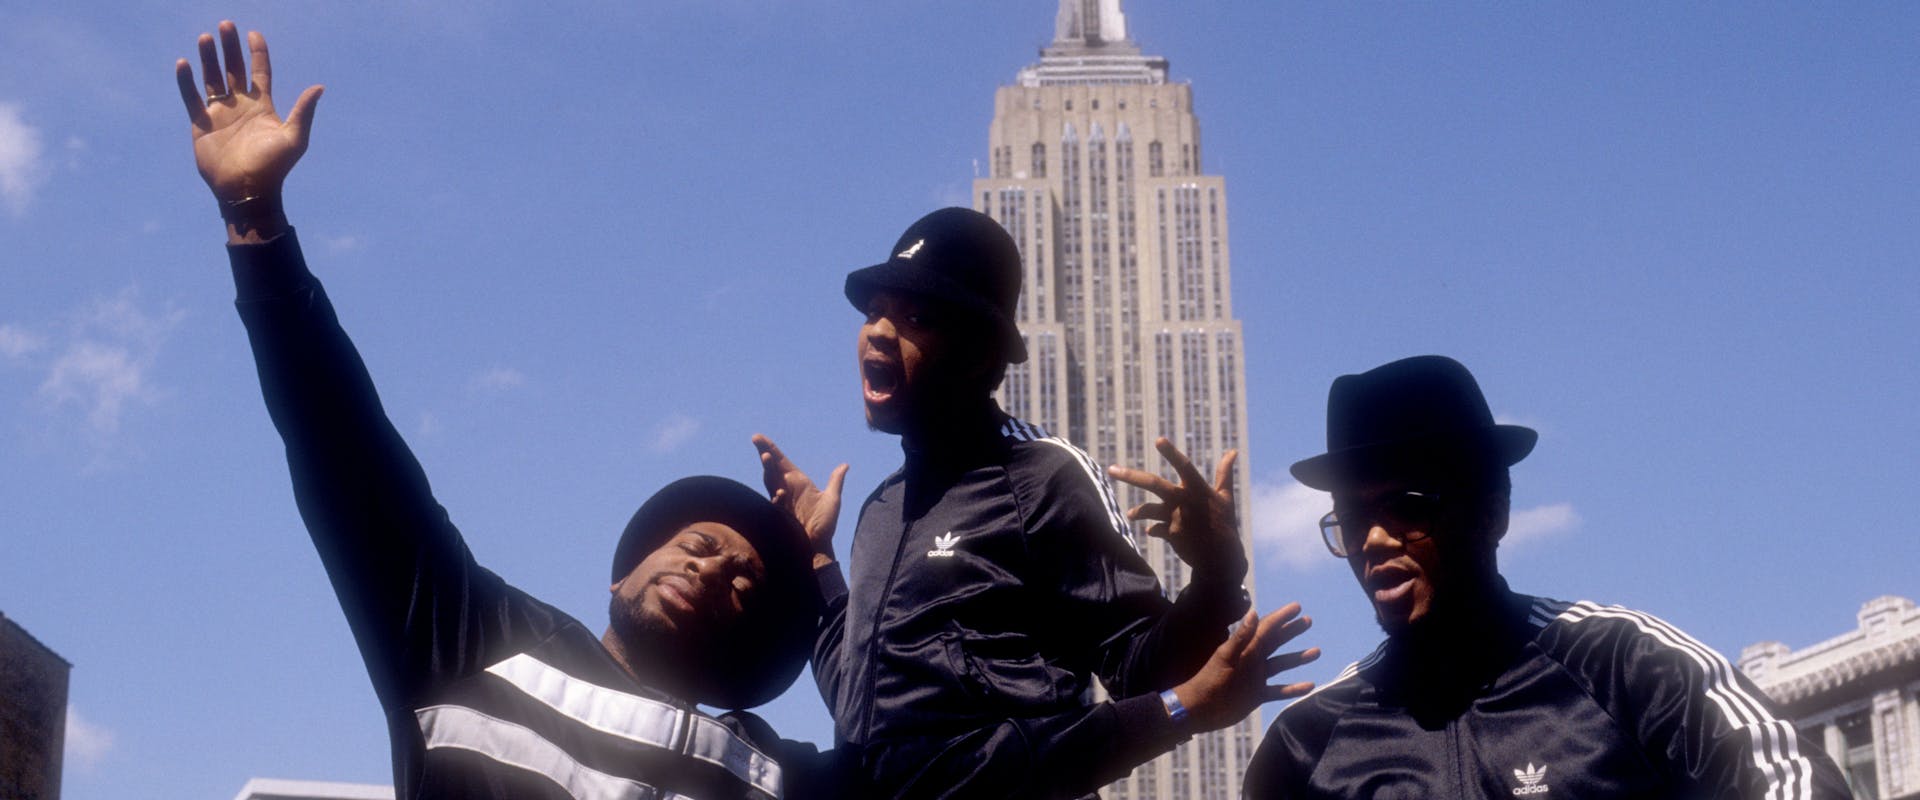 Joseph Simmons, Darryl McDaniels and Jam Master Jay of the hip-hop group "Run DMC" pose for a portrait session wearing Addidas sweat suits in front of the Empire State Building in May 1985 in New York, New York. 